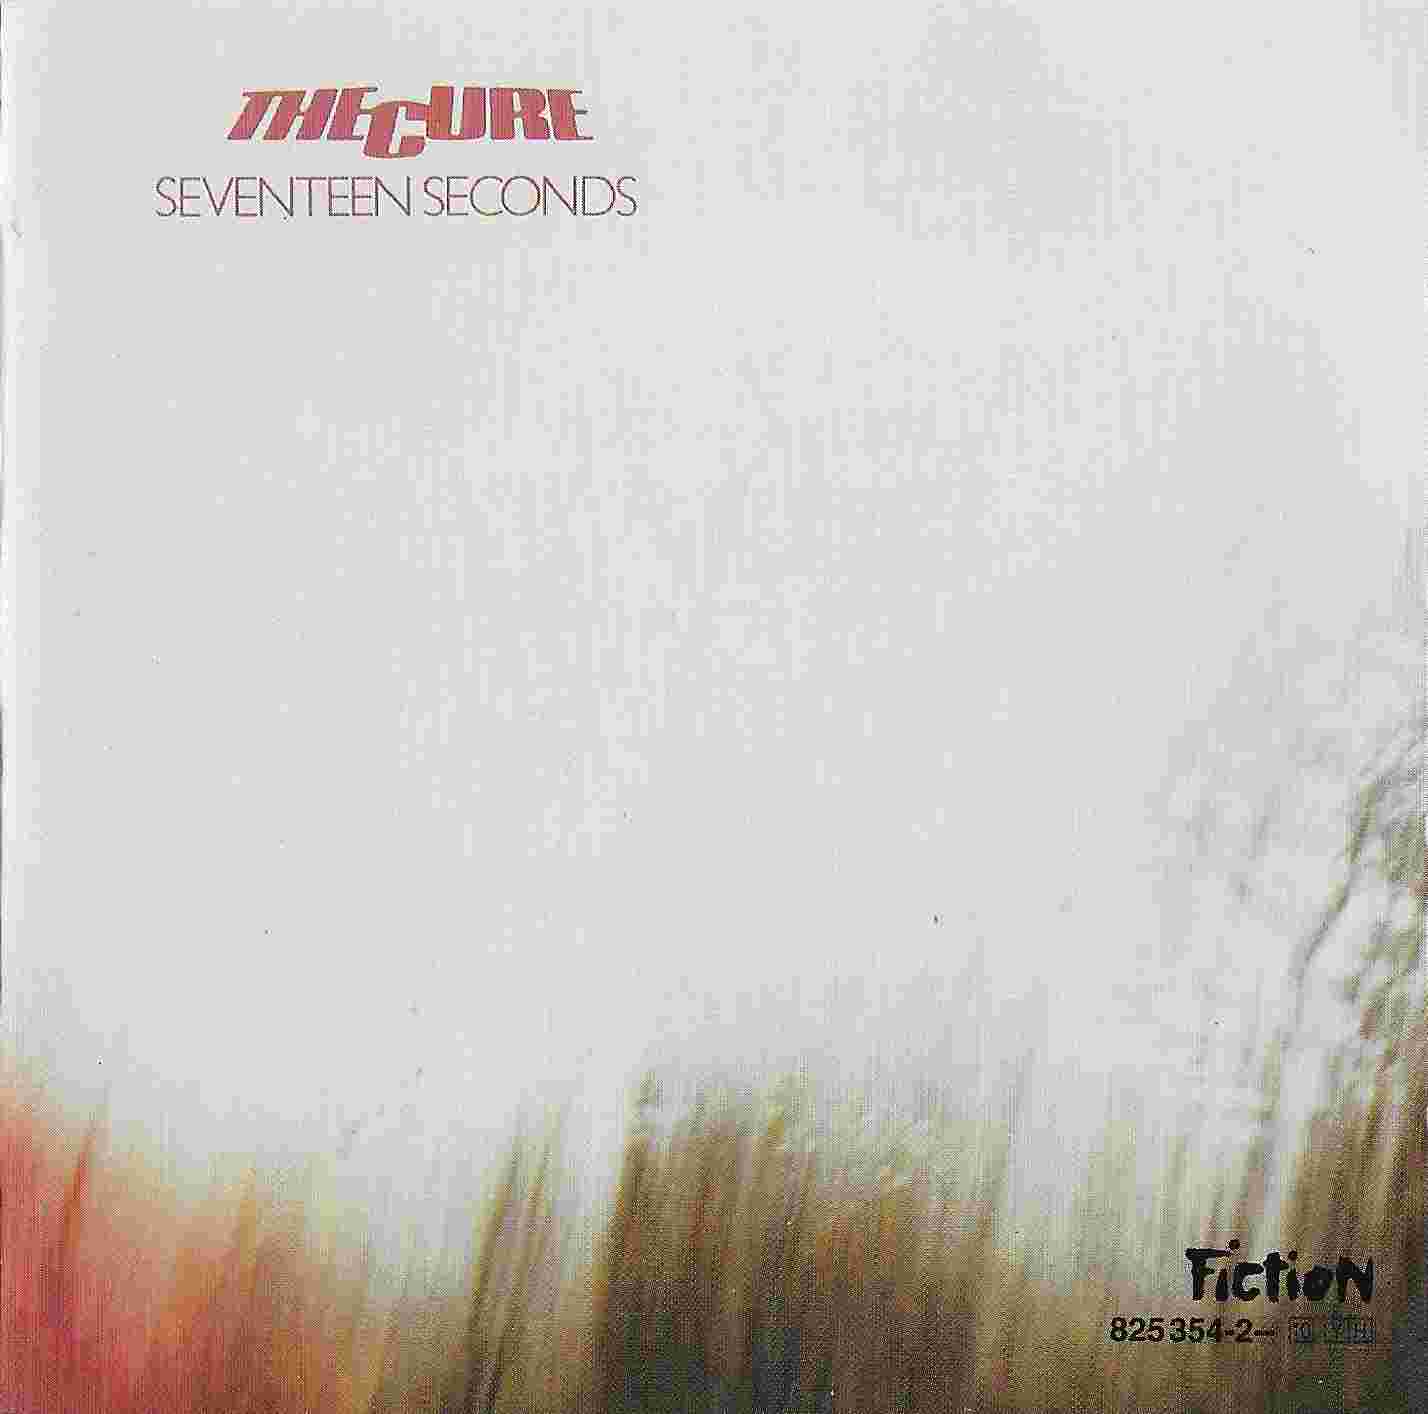 Picture of 825354 - 2 Seventeen seconds by artist The Cure